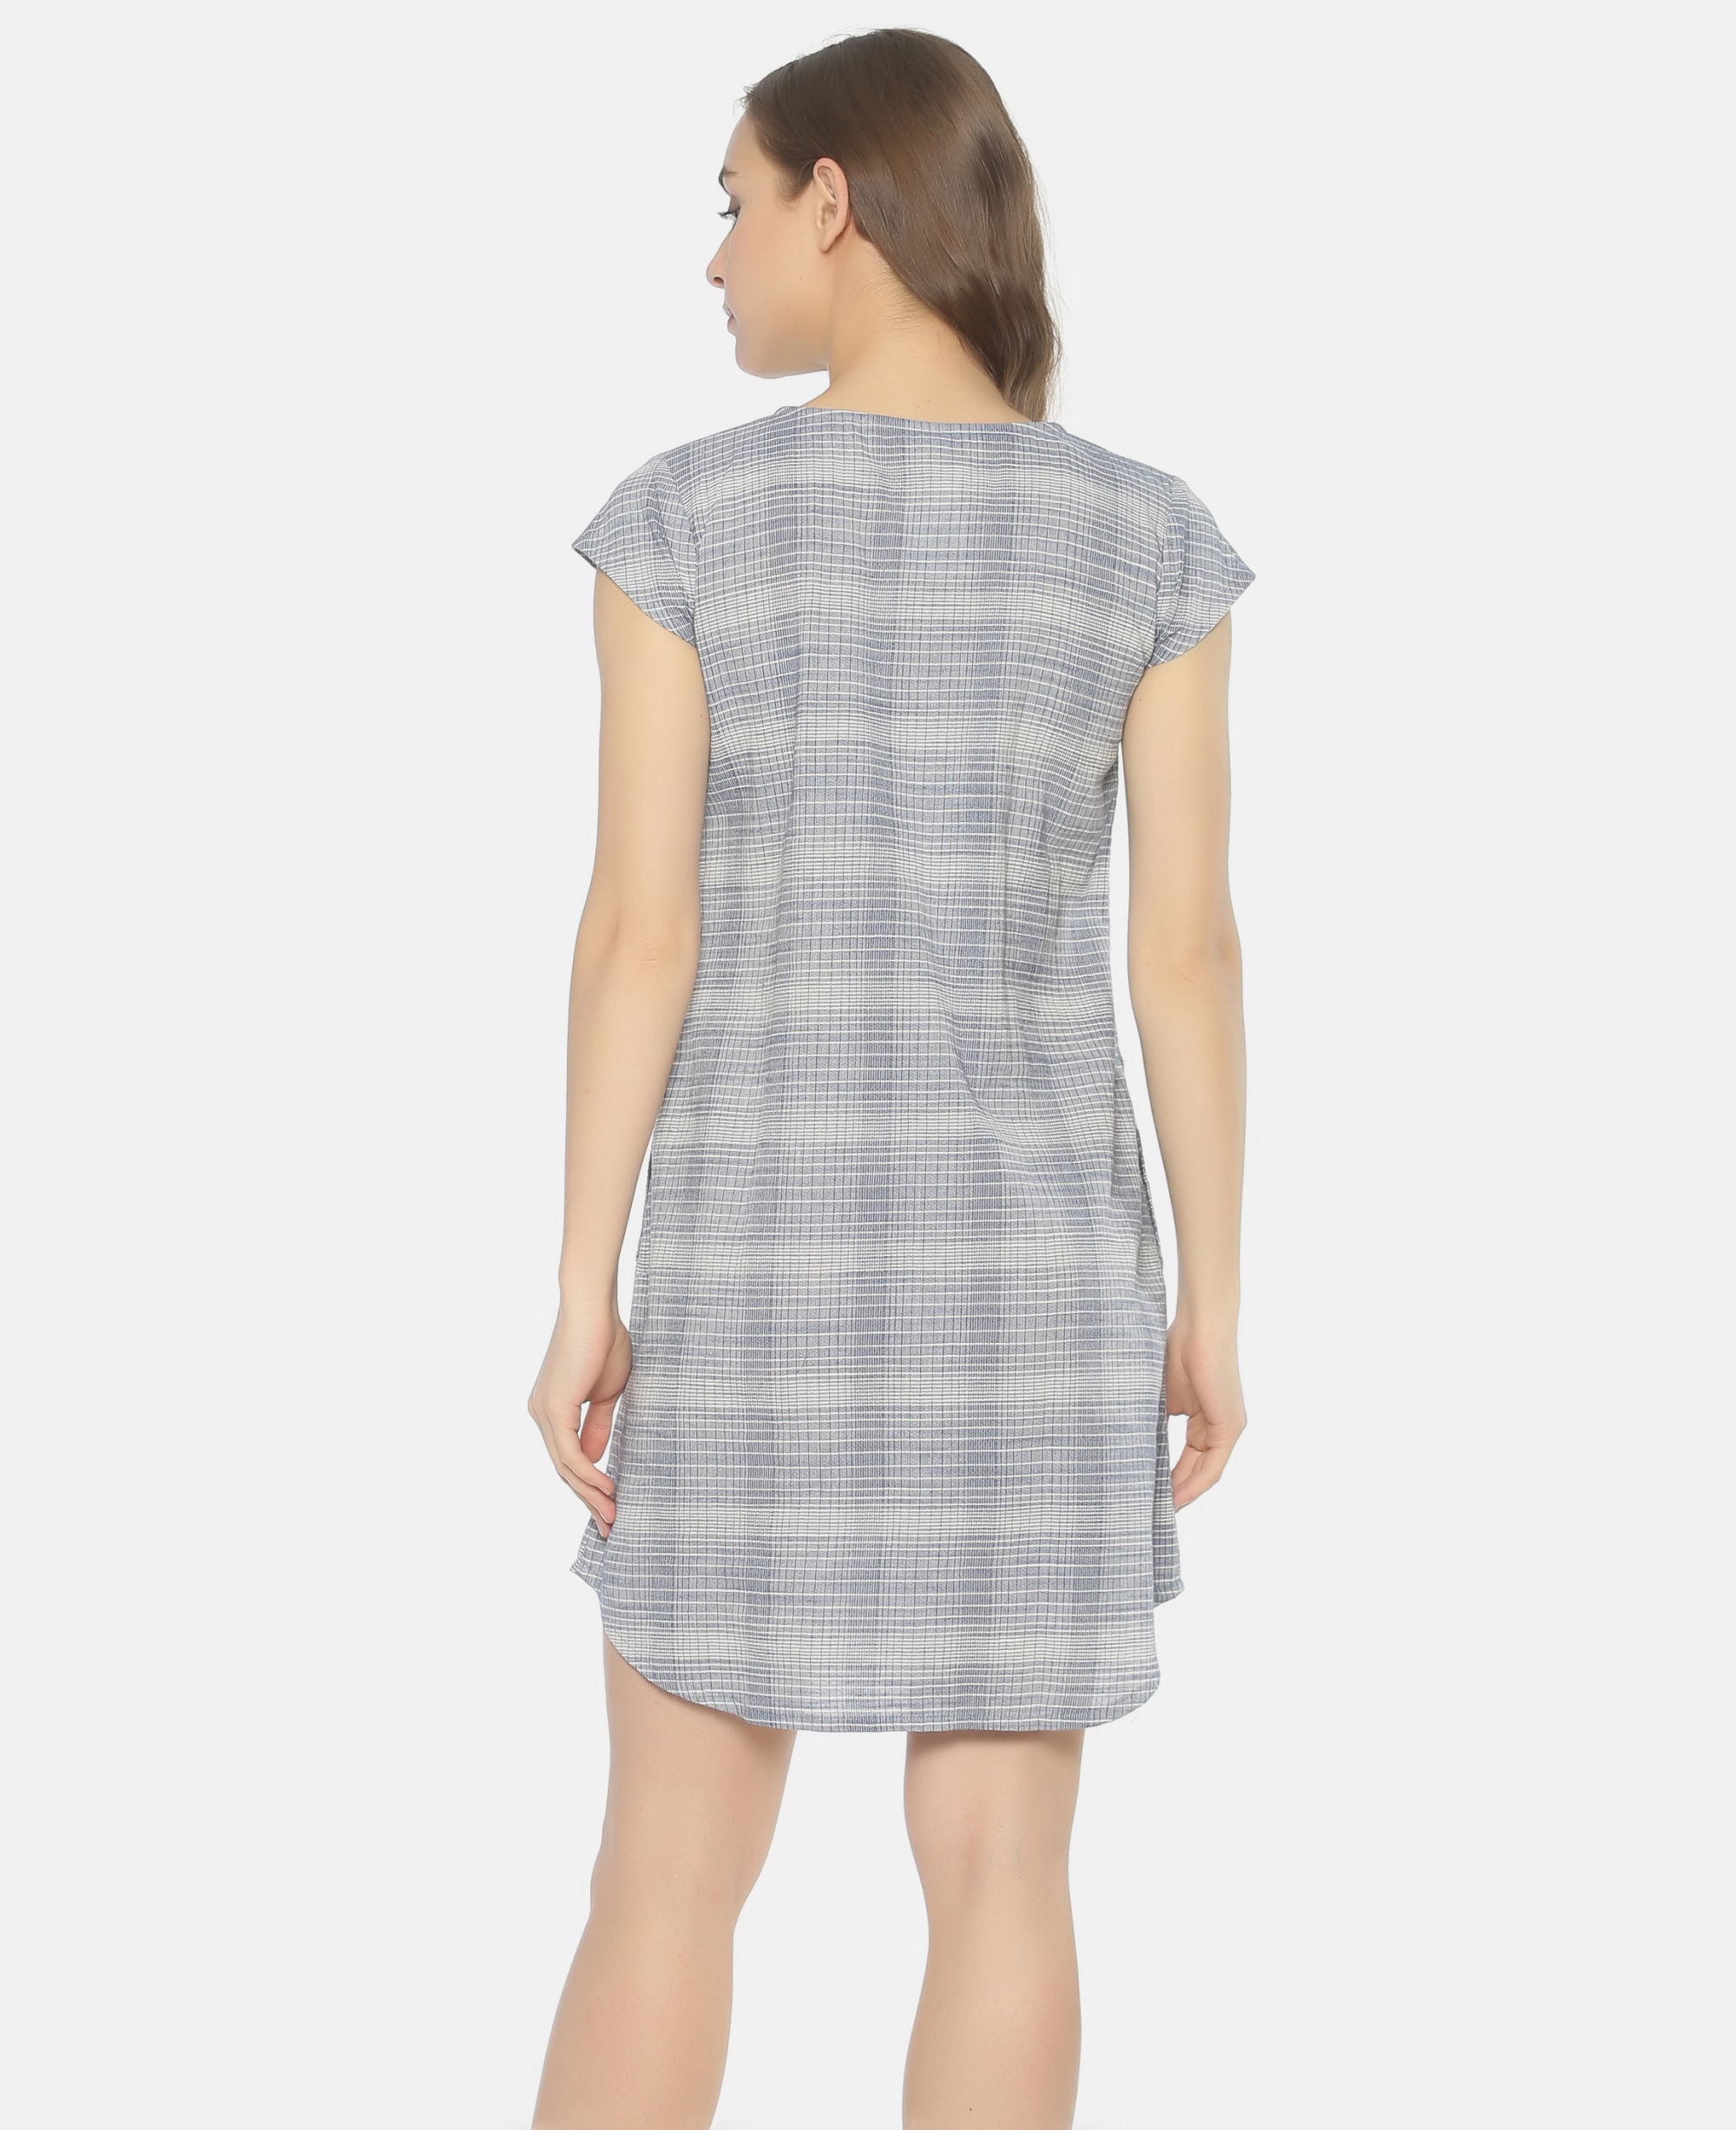 Light blue and white checkered dress by Label Y | The Secret Label